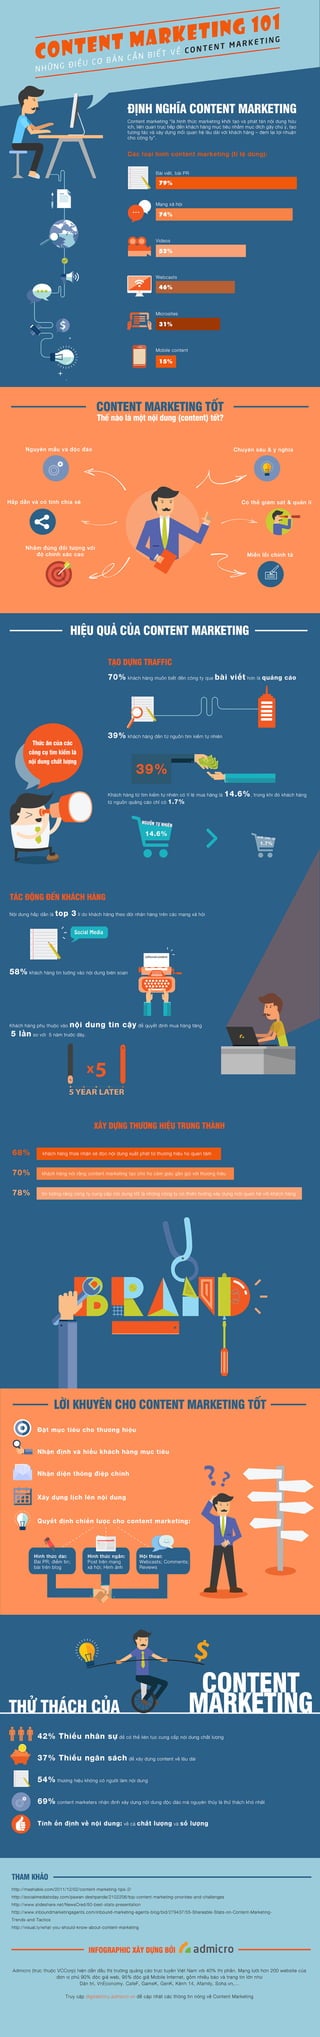 Infographic_Content marketing 101